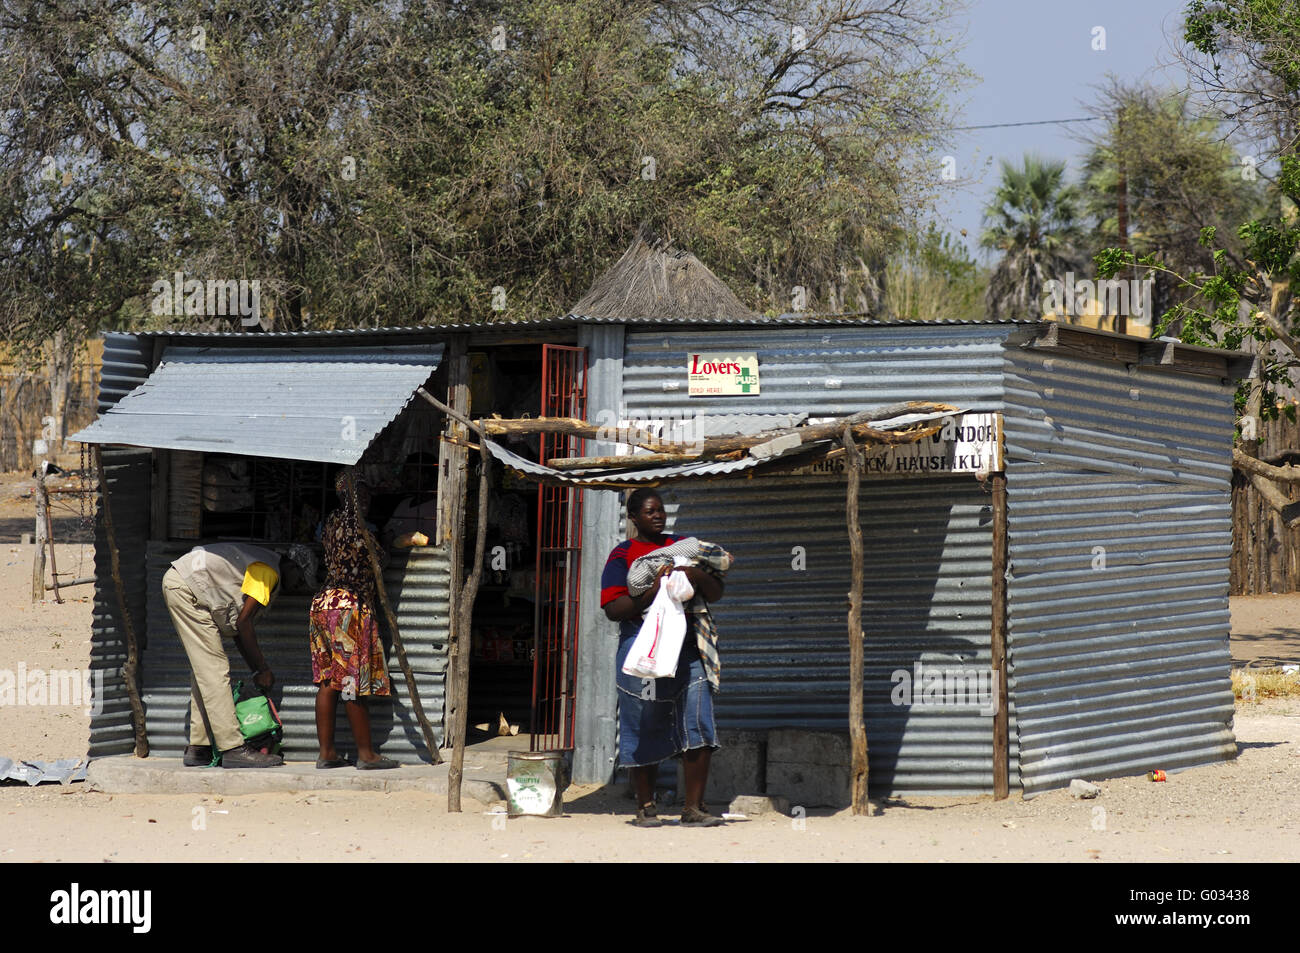 Daily Needs Store  in an African village, Botswana Stock Photo